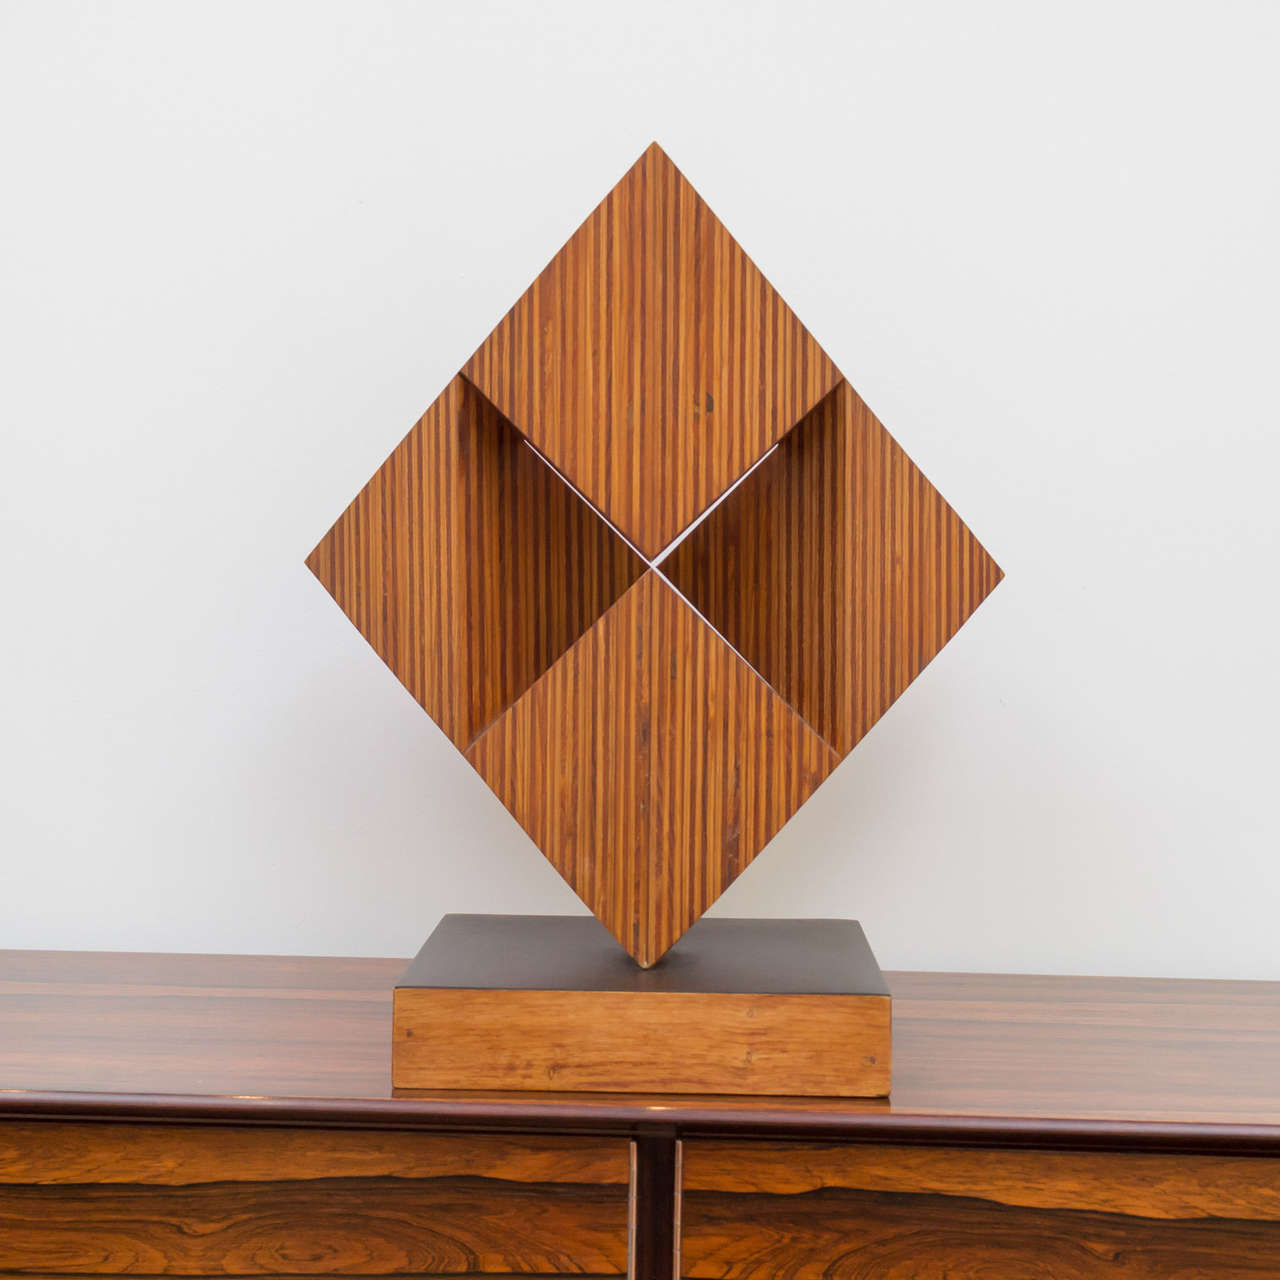 Beautifully executed stacked wood sculpture signed Ray Sells.

